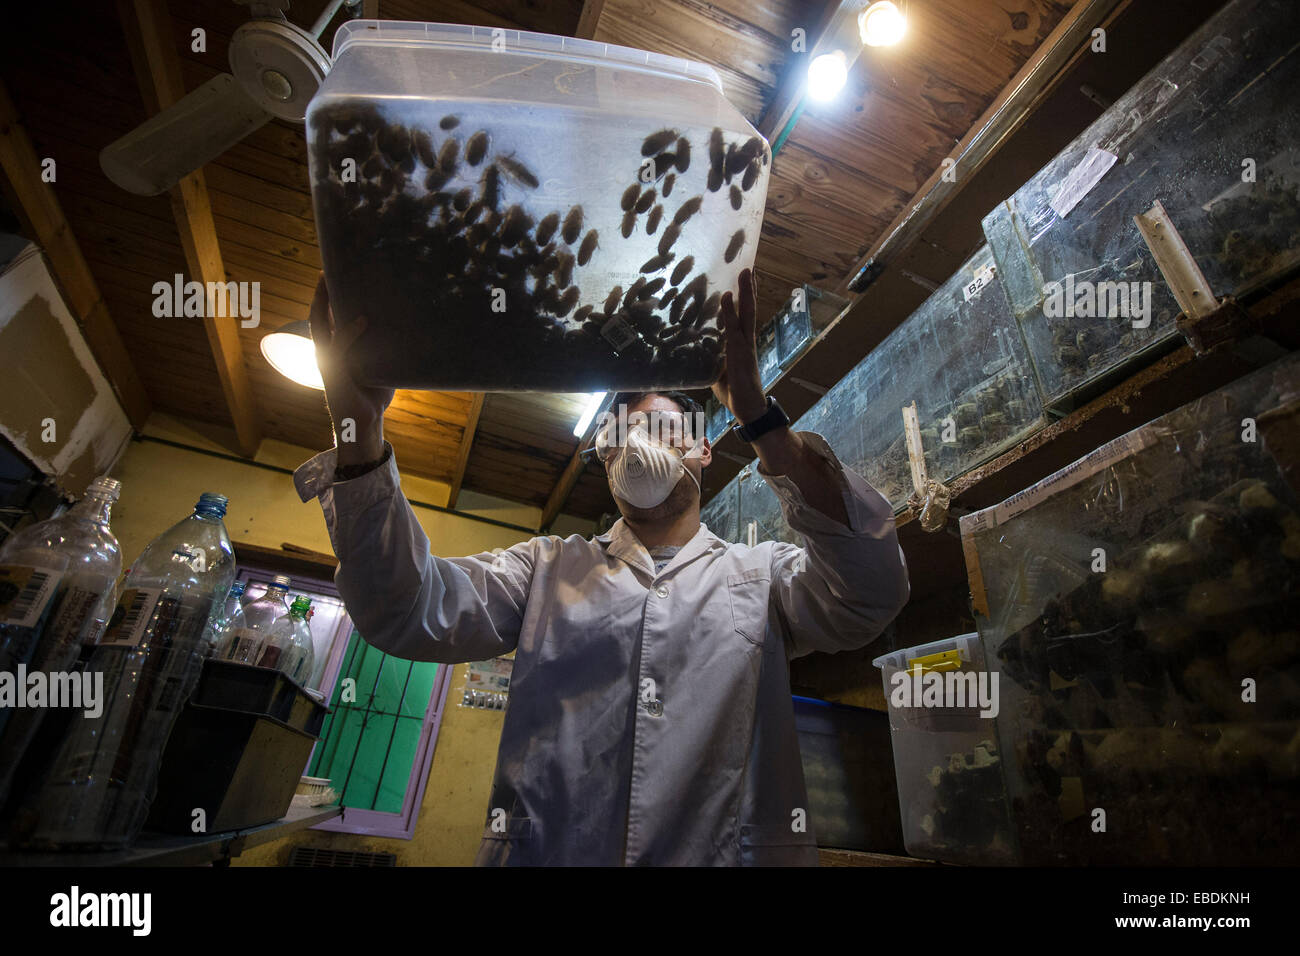 Buenos Aires, Argentina. 28th Nov, 2014. Matias Olmos, student of biological sciences, moves a box with cockroaches in the insect hatchery of biologist Daniel Caporaletti, in Buenos Aires city, capital of Argentina, on Nov. 28, 2014. The hatchery works as a provider of live food for reptiles, birds, fishes and other insectivorous pets. Daniel Caporaletti is currently working on a project of insect breeding for human consumption. © Martin Zabala/Xinhua/Alamy Live News Stock Photo